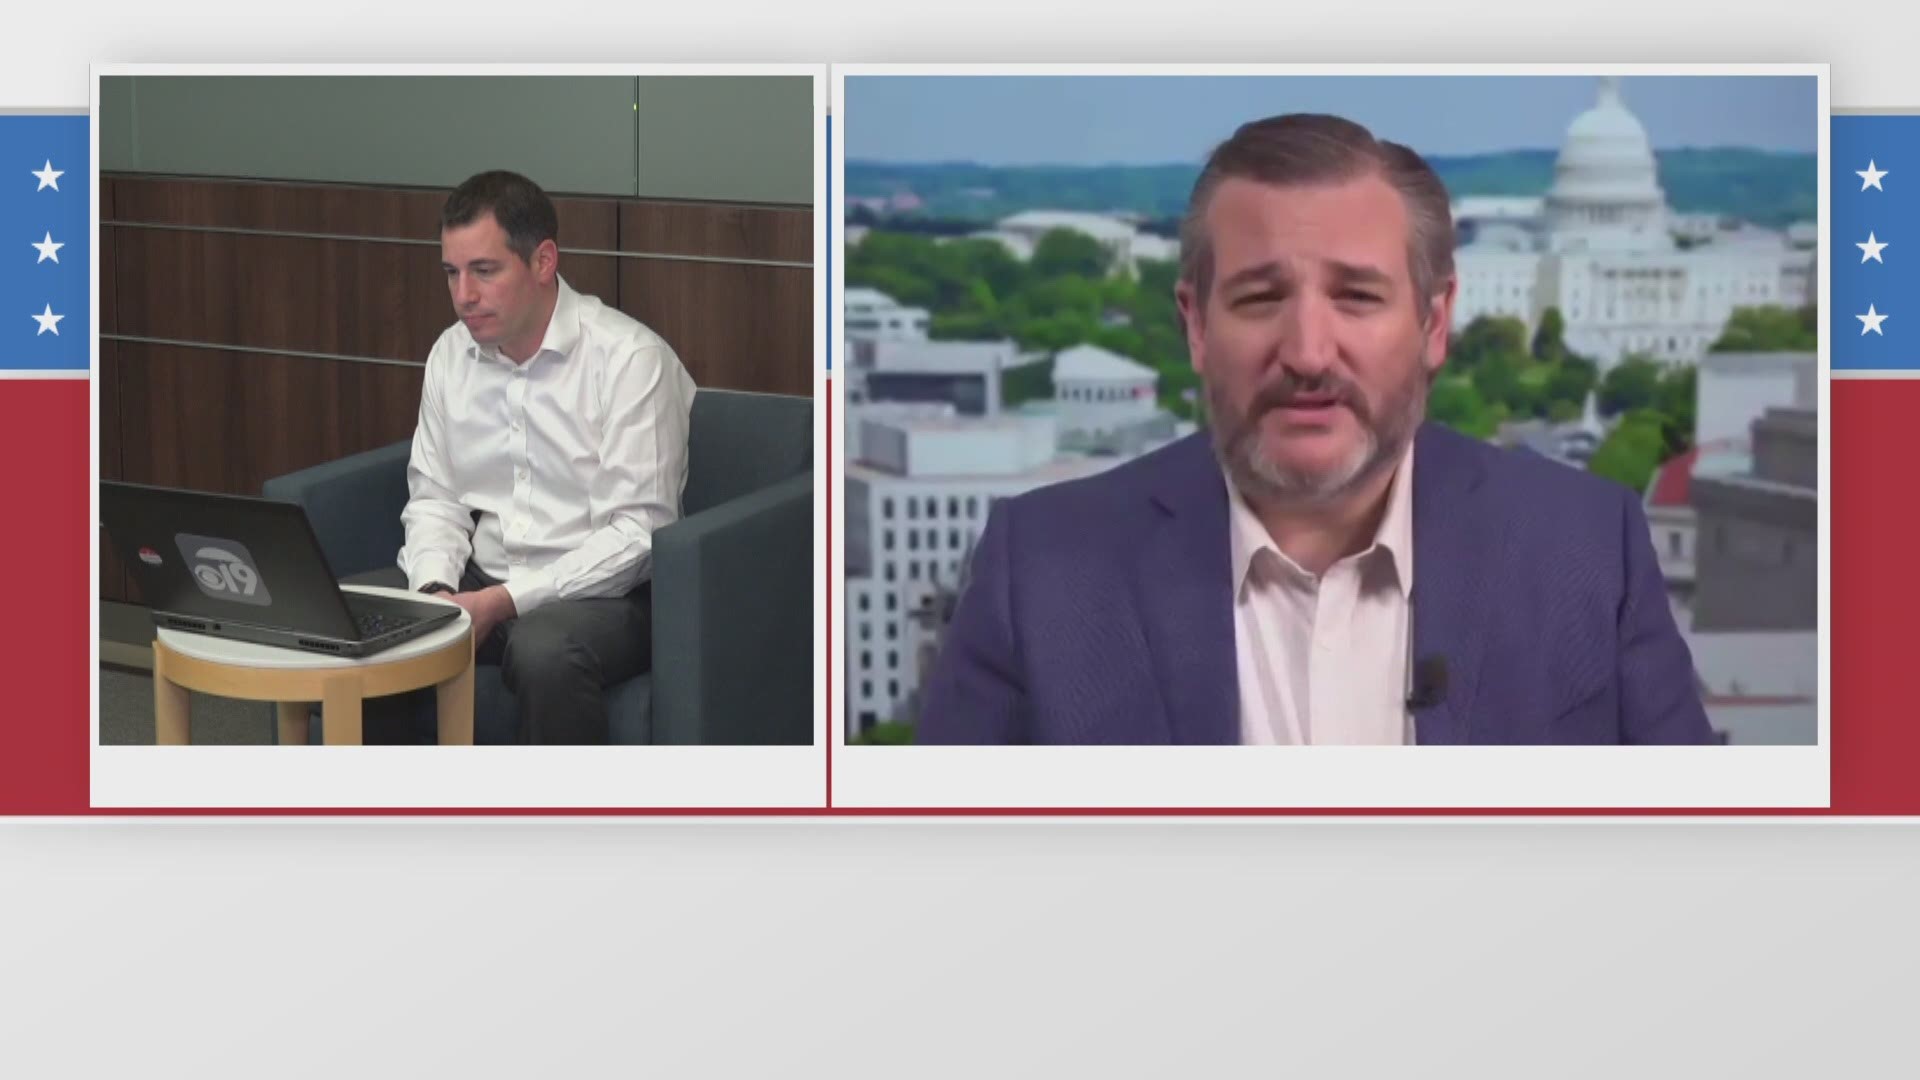 Sen. Ted Cruz (R-Texas) speaks with ETX Covered's David Lippman about the US Capitol riot, whether he bears any responsibility, and what happens next for the GOP